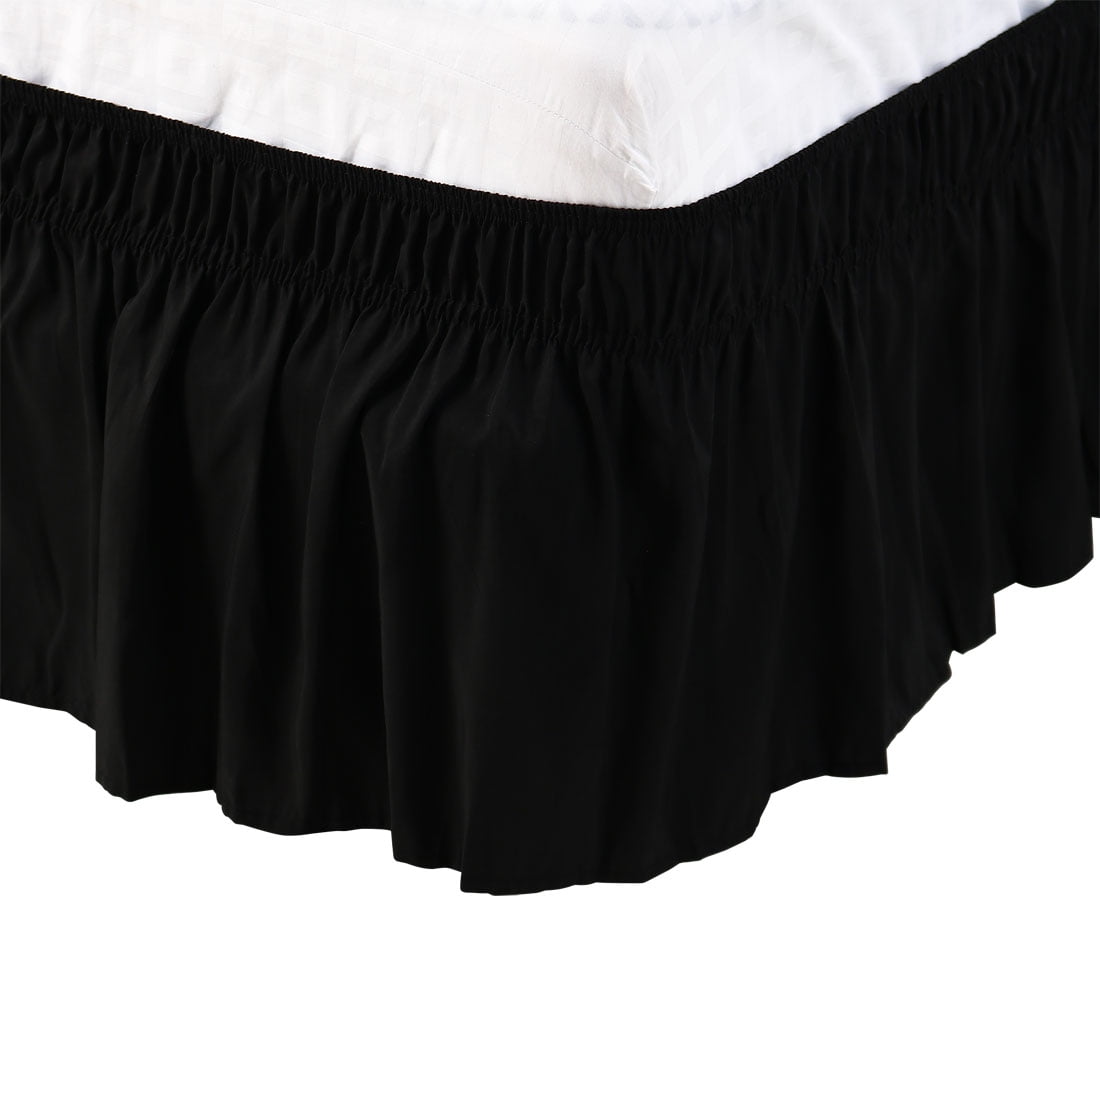 Details about   Bed Skirt Dust Ruffle Full Size 15 in Drop Wrinkle Free Fade Resistant Gray Soft 